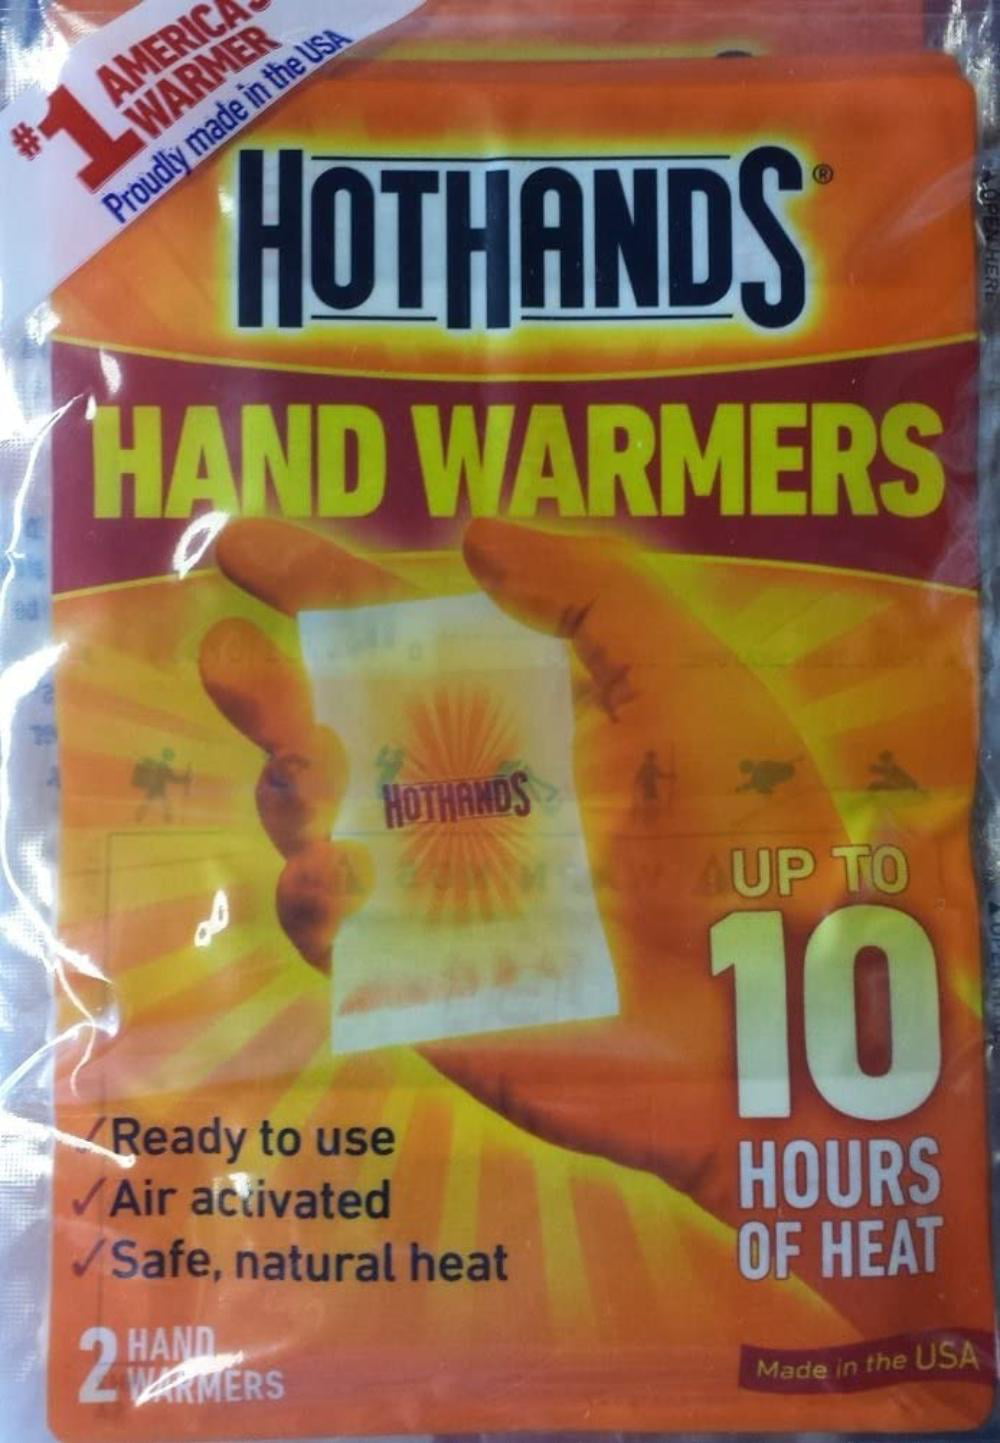 HotHands Hand Warmers Ready to Use 3 Pair Pk 10 Hrs of Heat Exp 1/20 FF 